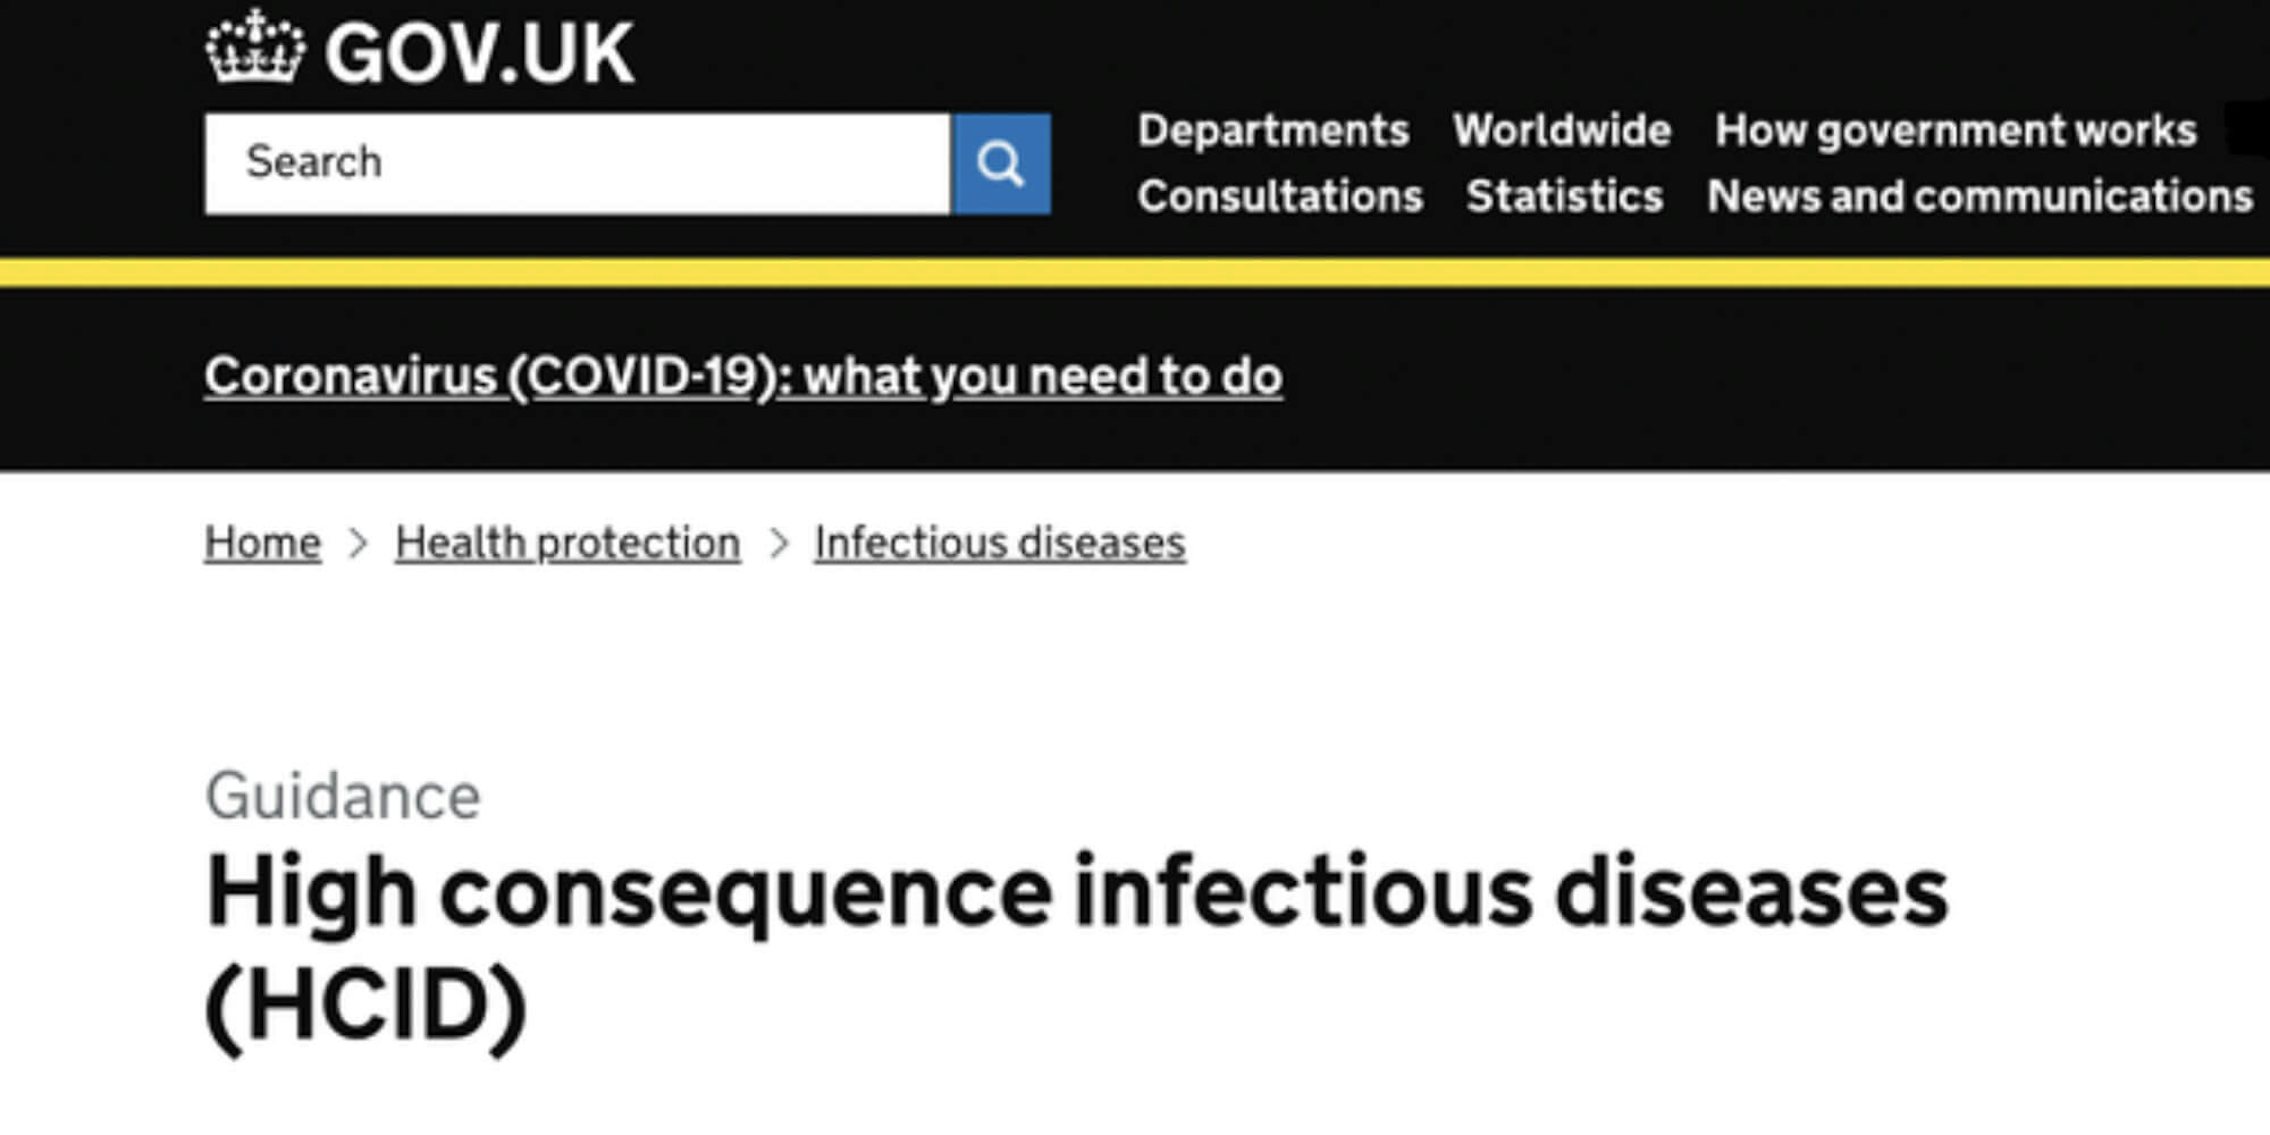 A section of the UK government website on coronavirus